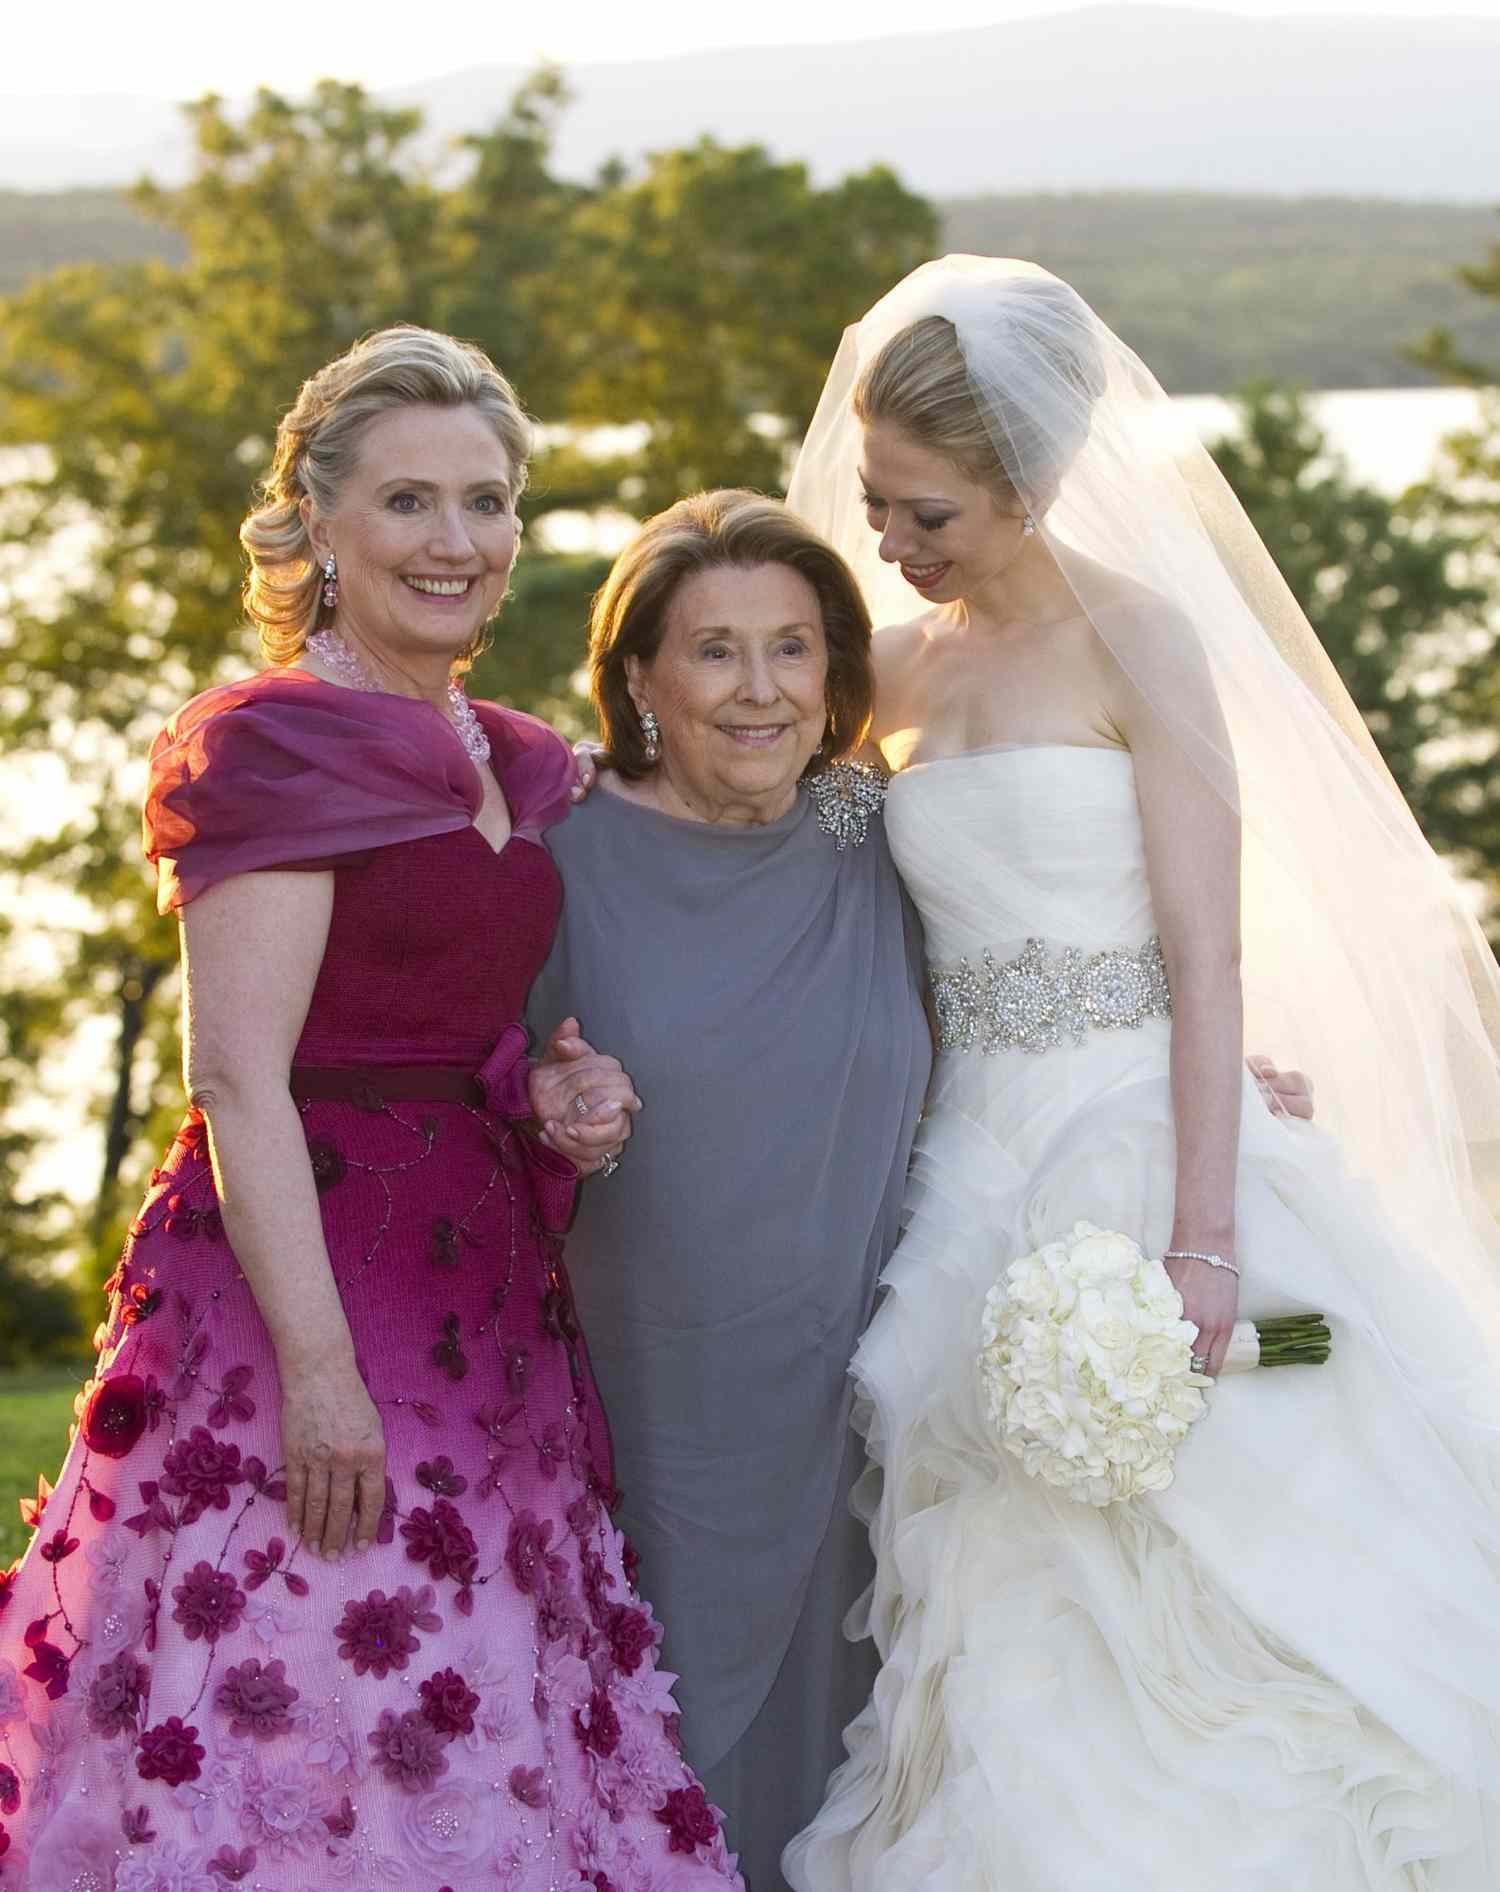 Hilary Clinton as the Mother of the Bride